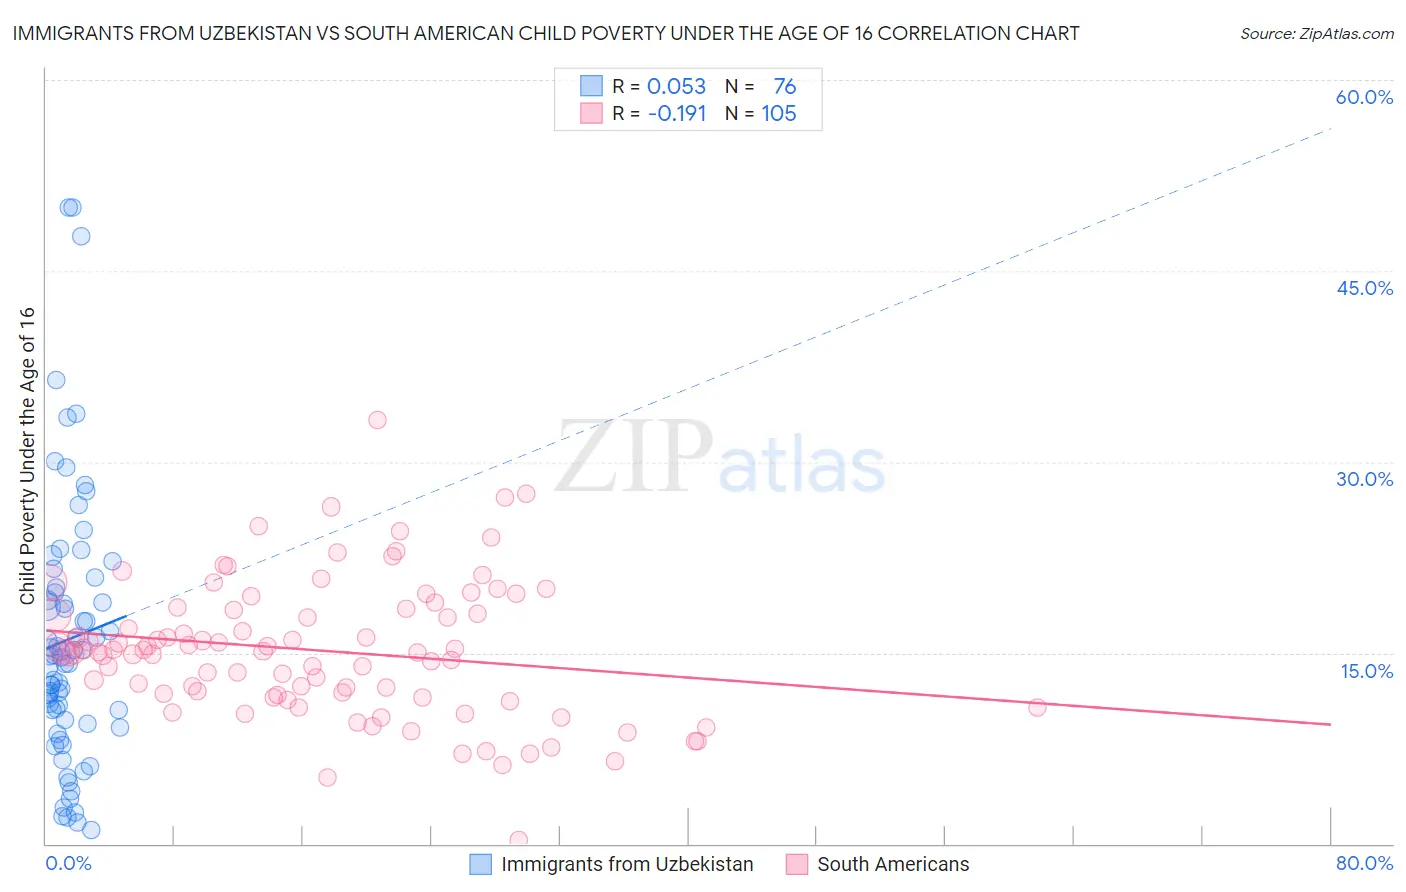 Immigrants from Uzbekistan vs South American Child Poverty Under the Age of 16